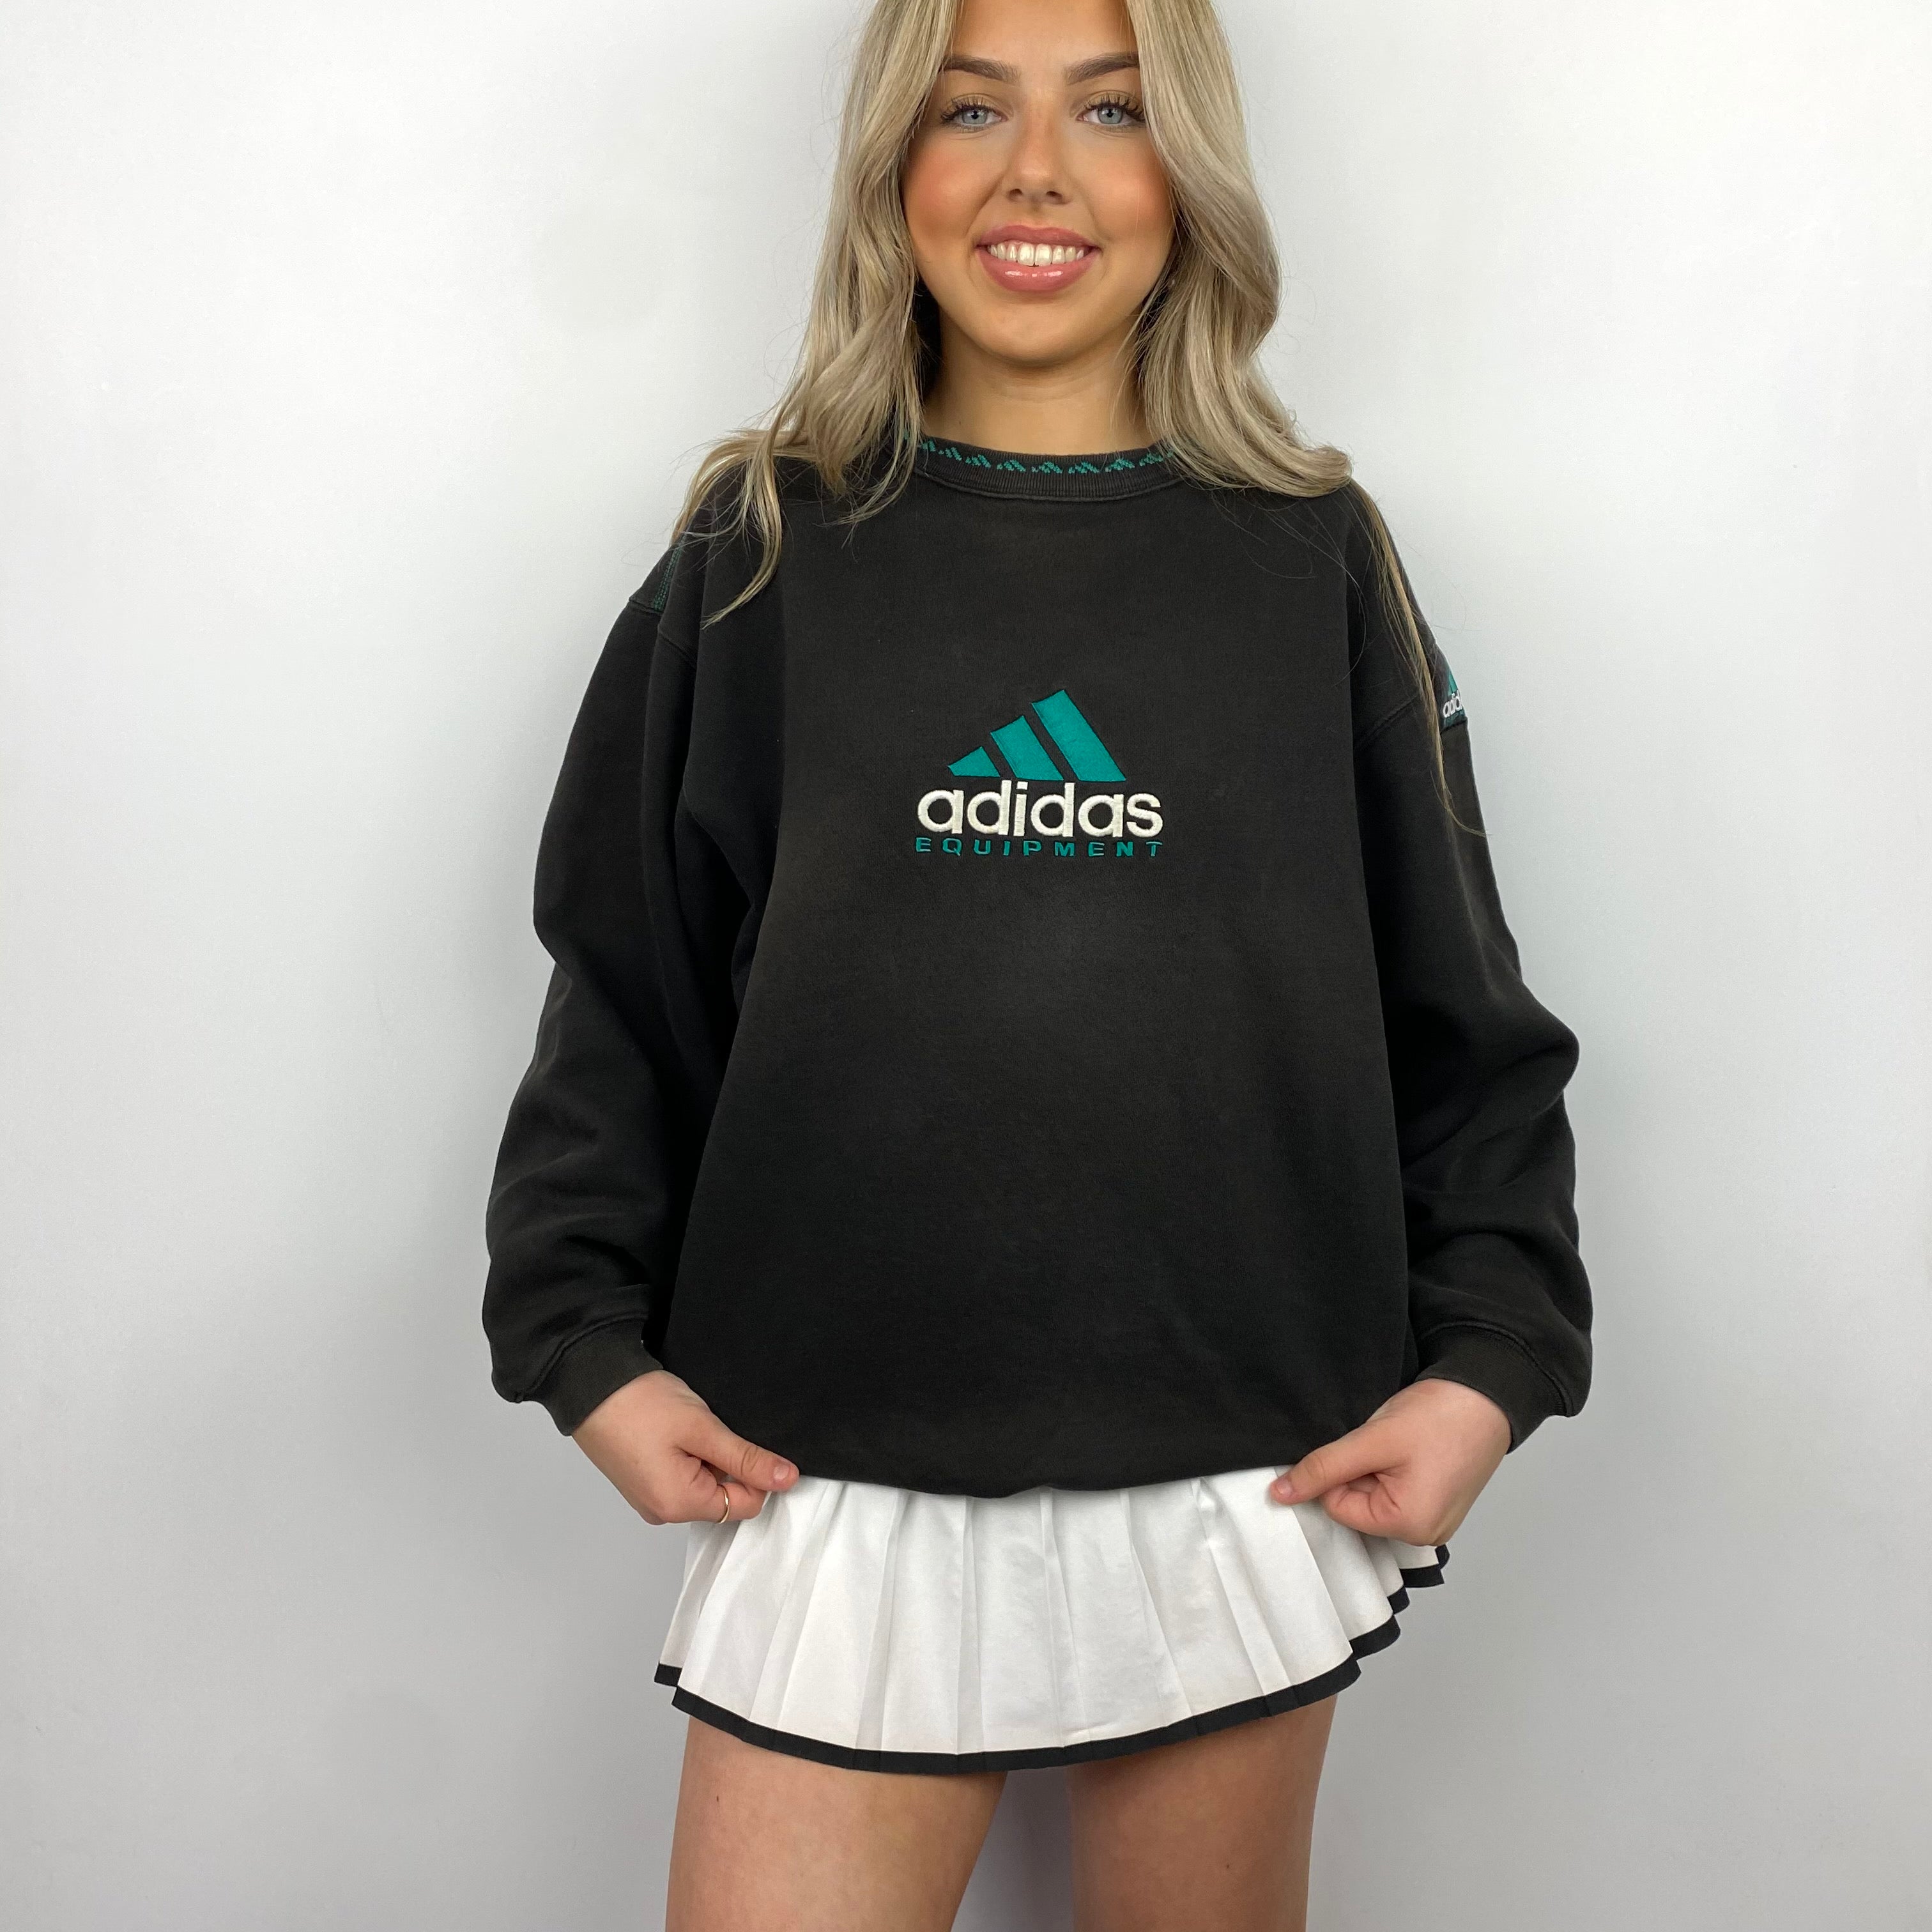 Adidas Equipment EQT RARE Black Embroidered Spell Out Sweatshirt (M)